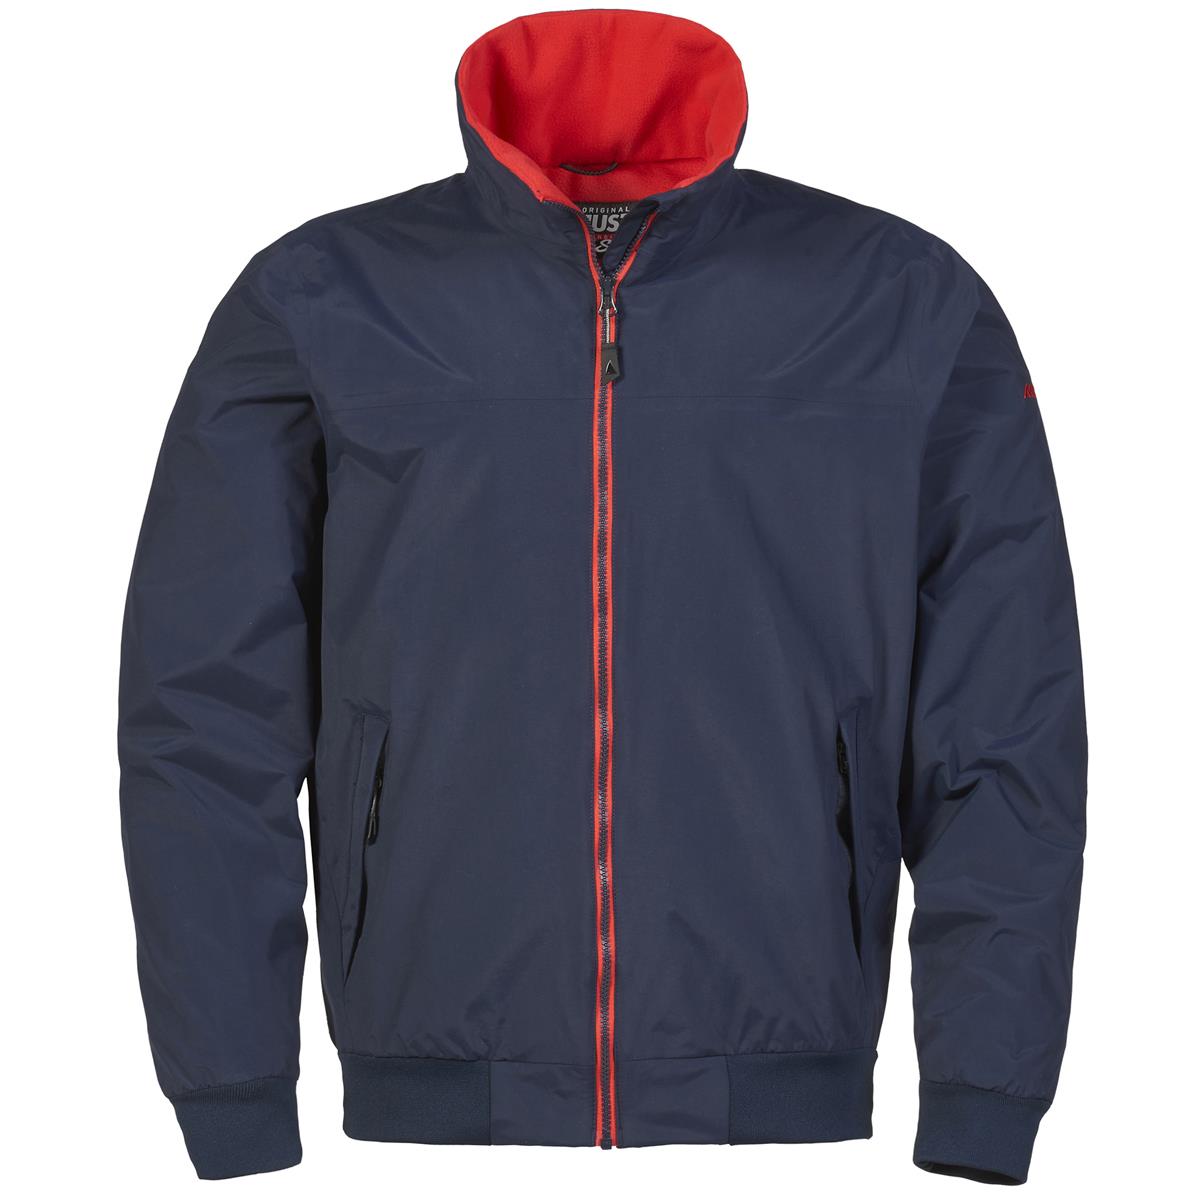 Which pockets does the Musto Snug Blouson Jacket 2.0 feature?